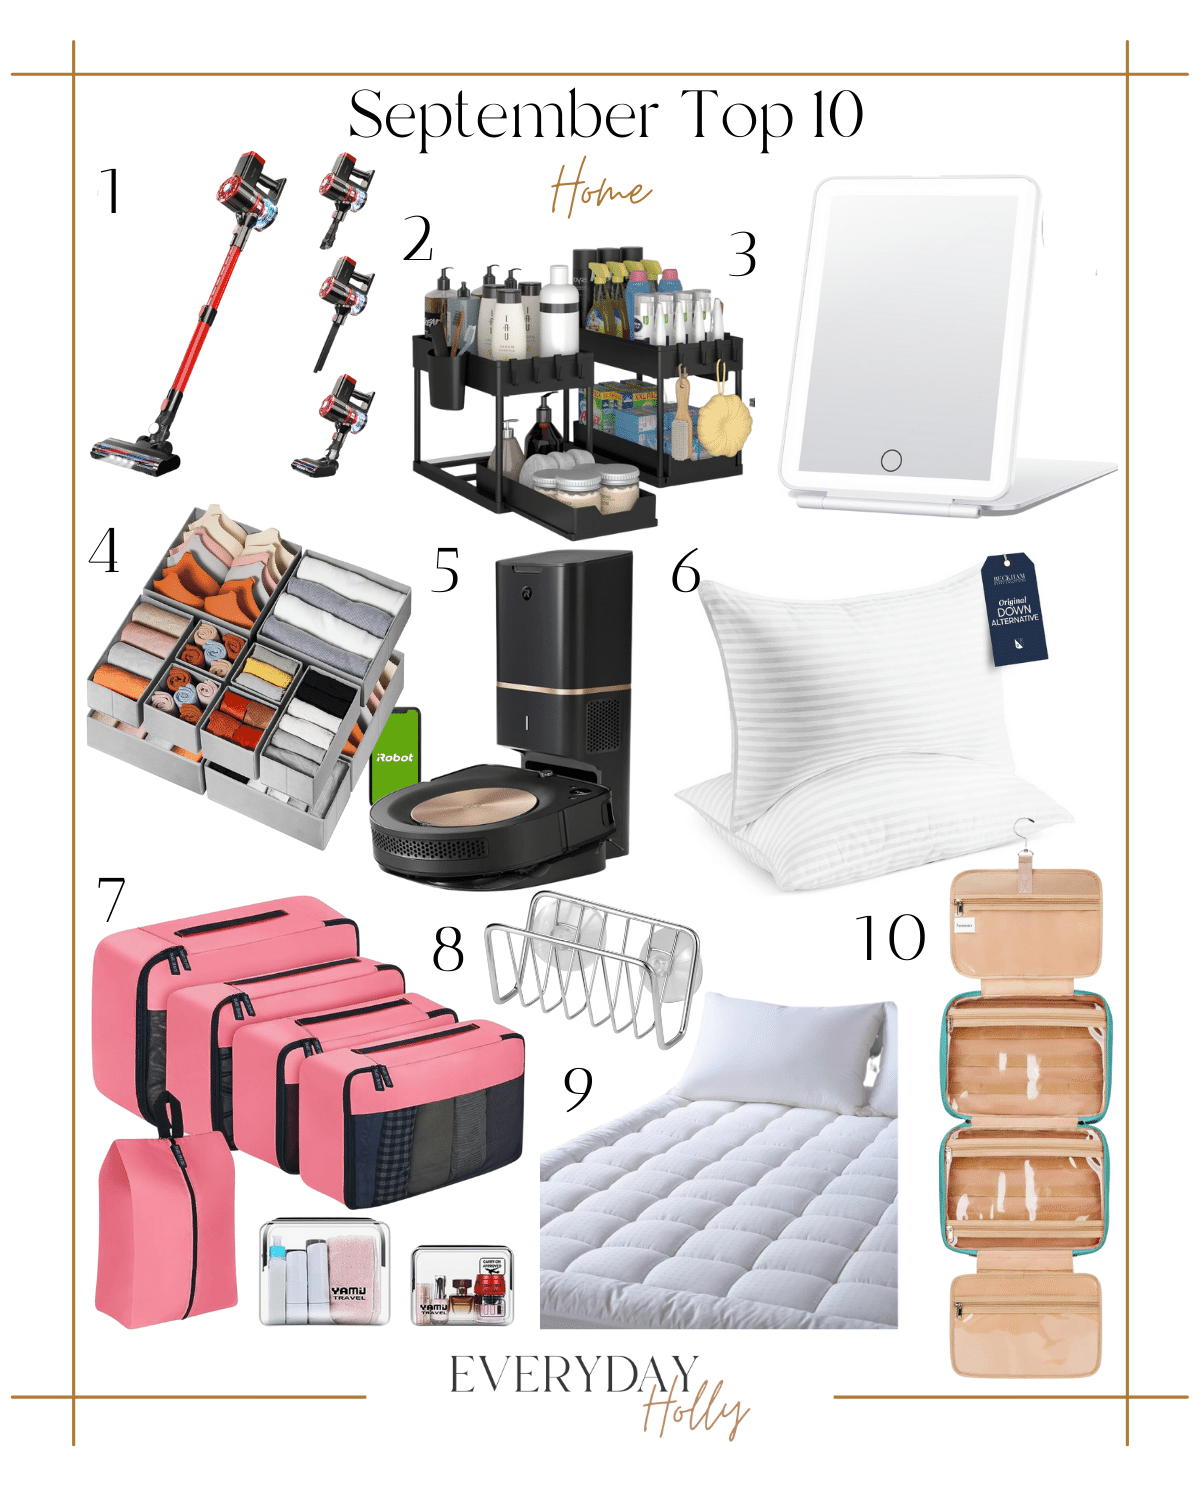 september top sellers | #september #top #sellers #amazon #home #essentials #vacuum #cleaning #organize #storage #drawer #roomba #pillow #packingcube #kitchen #caddy #toiletries